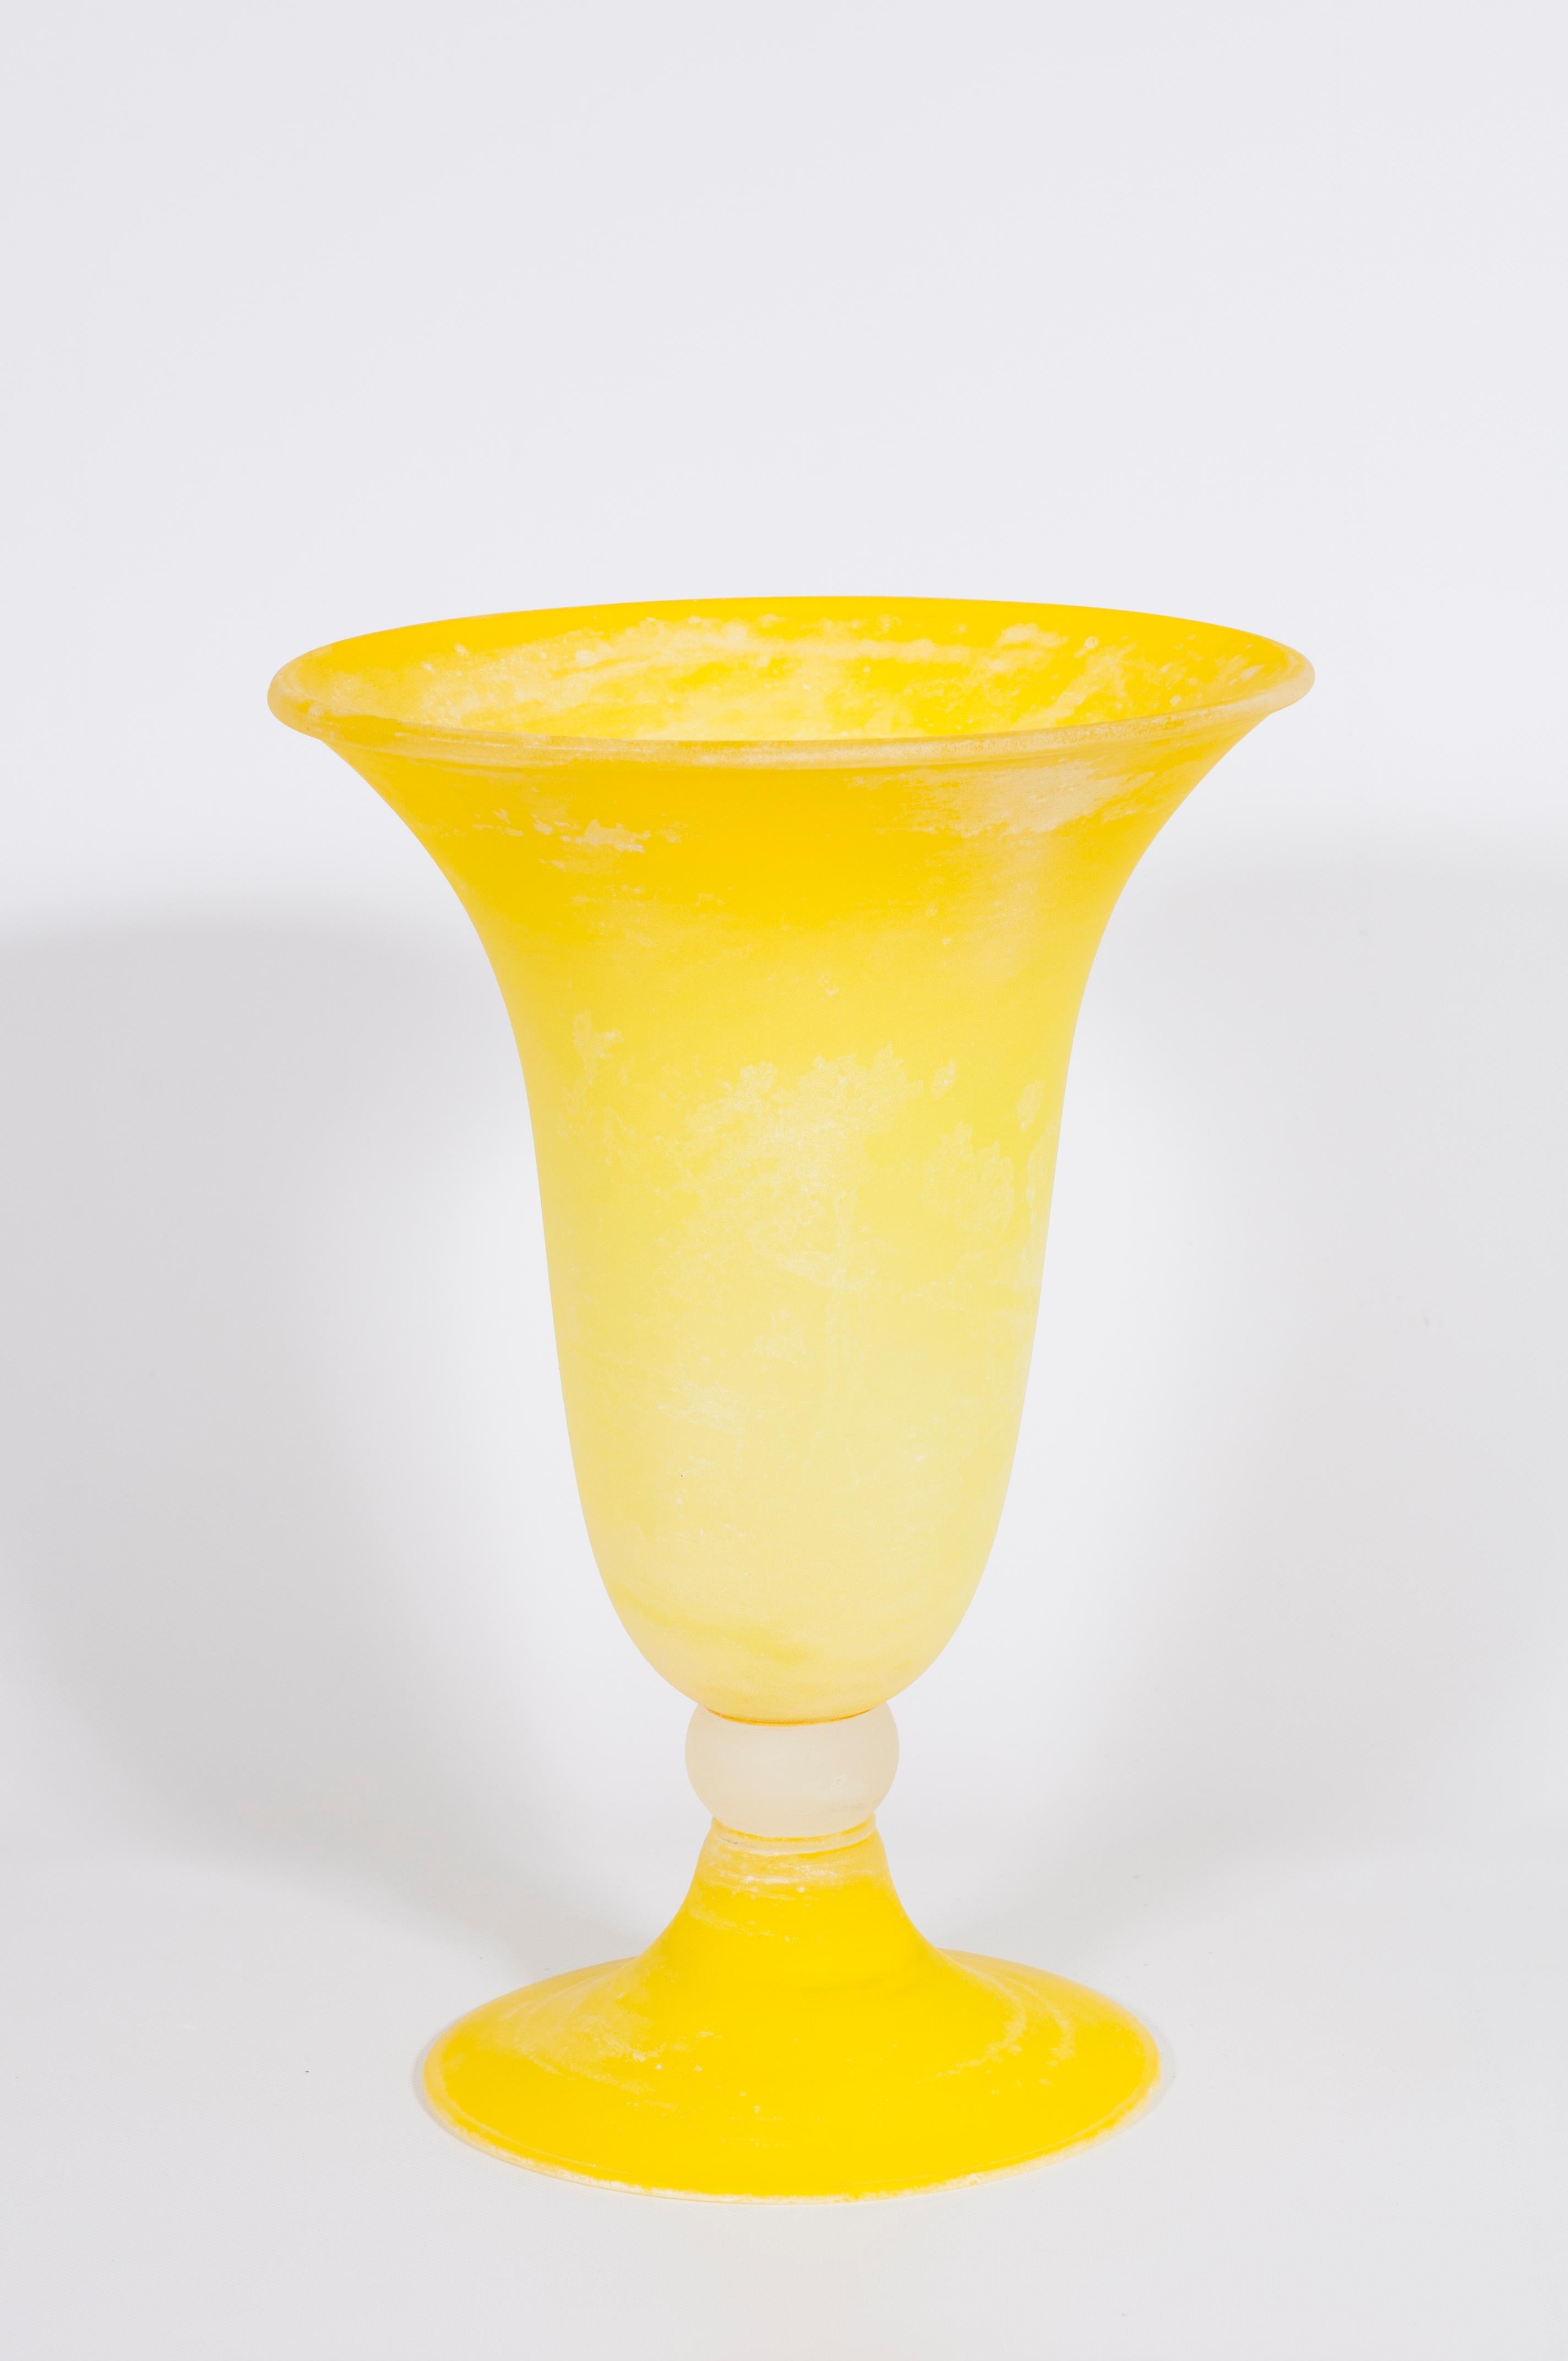 Italian Venetian Yellow Murano Glass Scavo Vase Contemporary 1990s
This refined and elegant Venetian work of art was made in the island of Murano in the 1990s by Cenedese, following the ancient Murano glassmaking techniques. 
Its peculiar antiqued